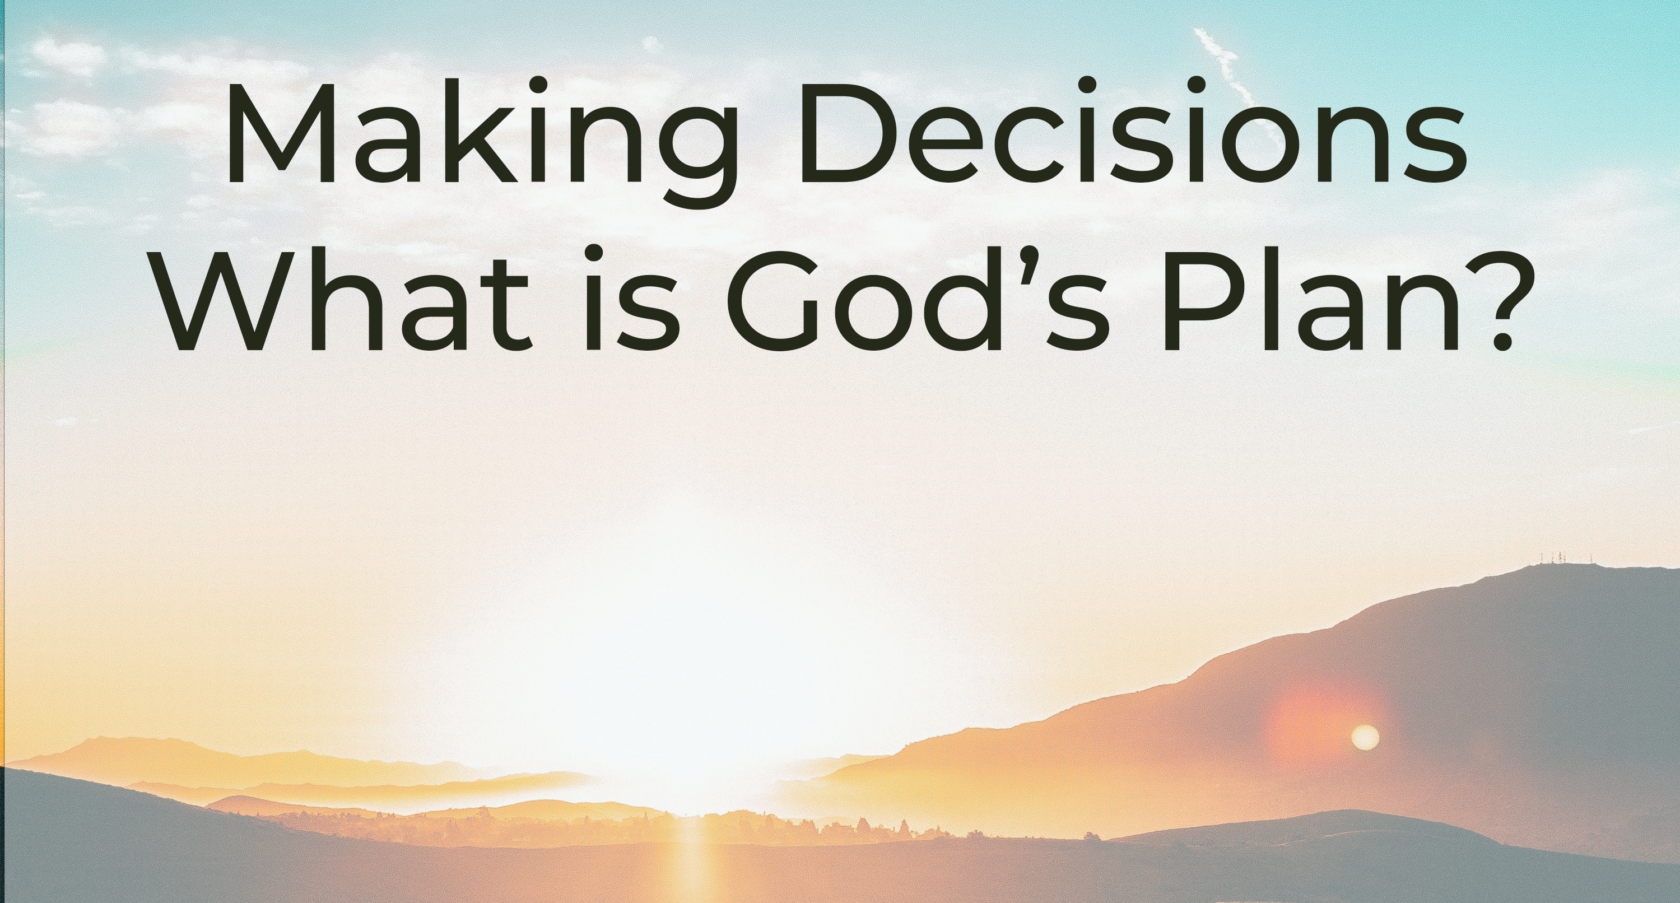 Podcast - Making Decisions: God's Plan